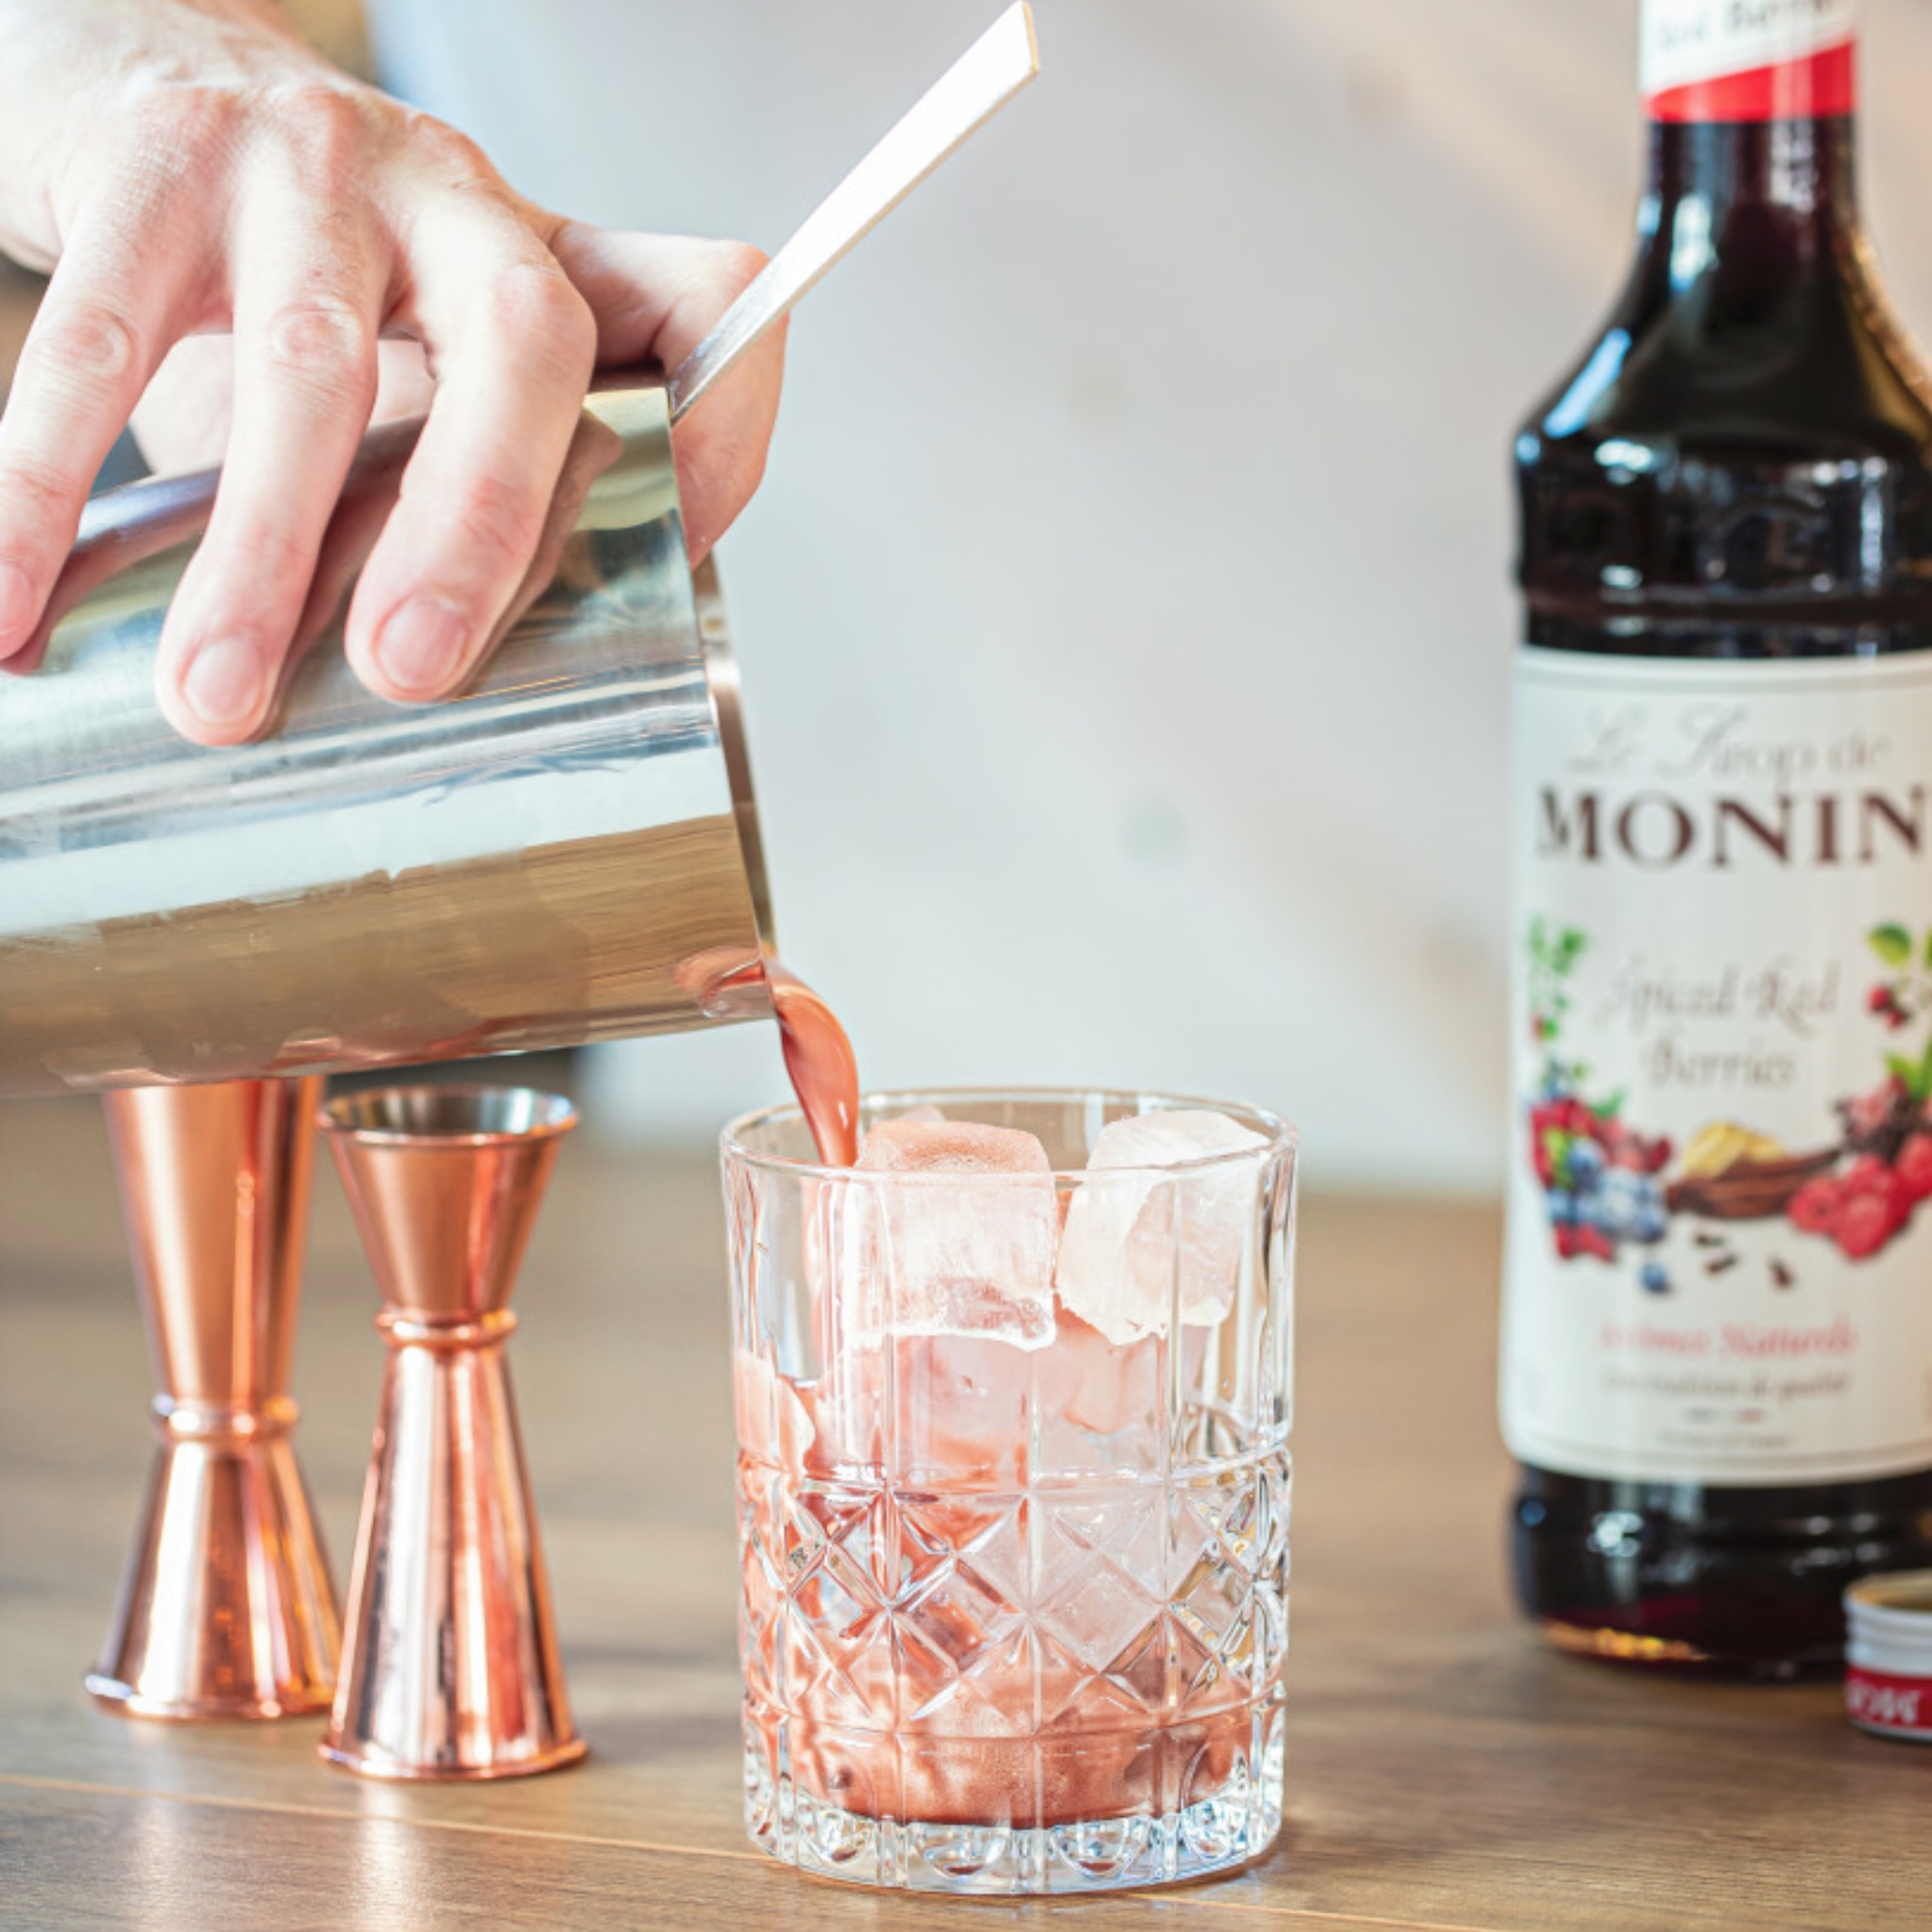 Le Sirop de MONIN Spiced Red Berries: a touch of spice and sweetness